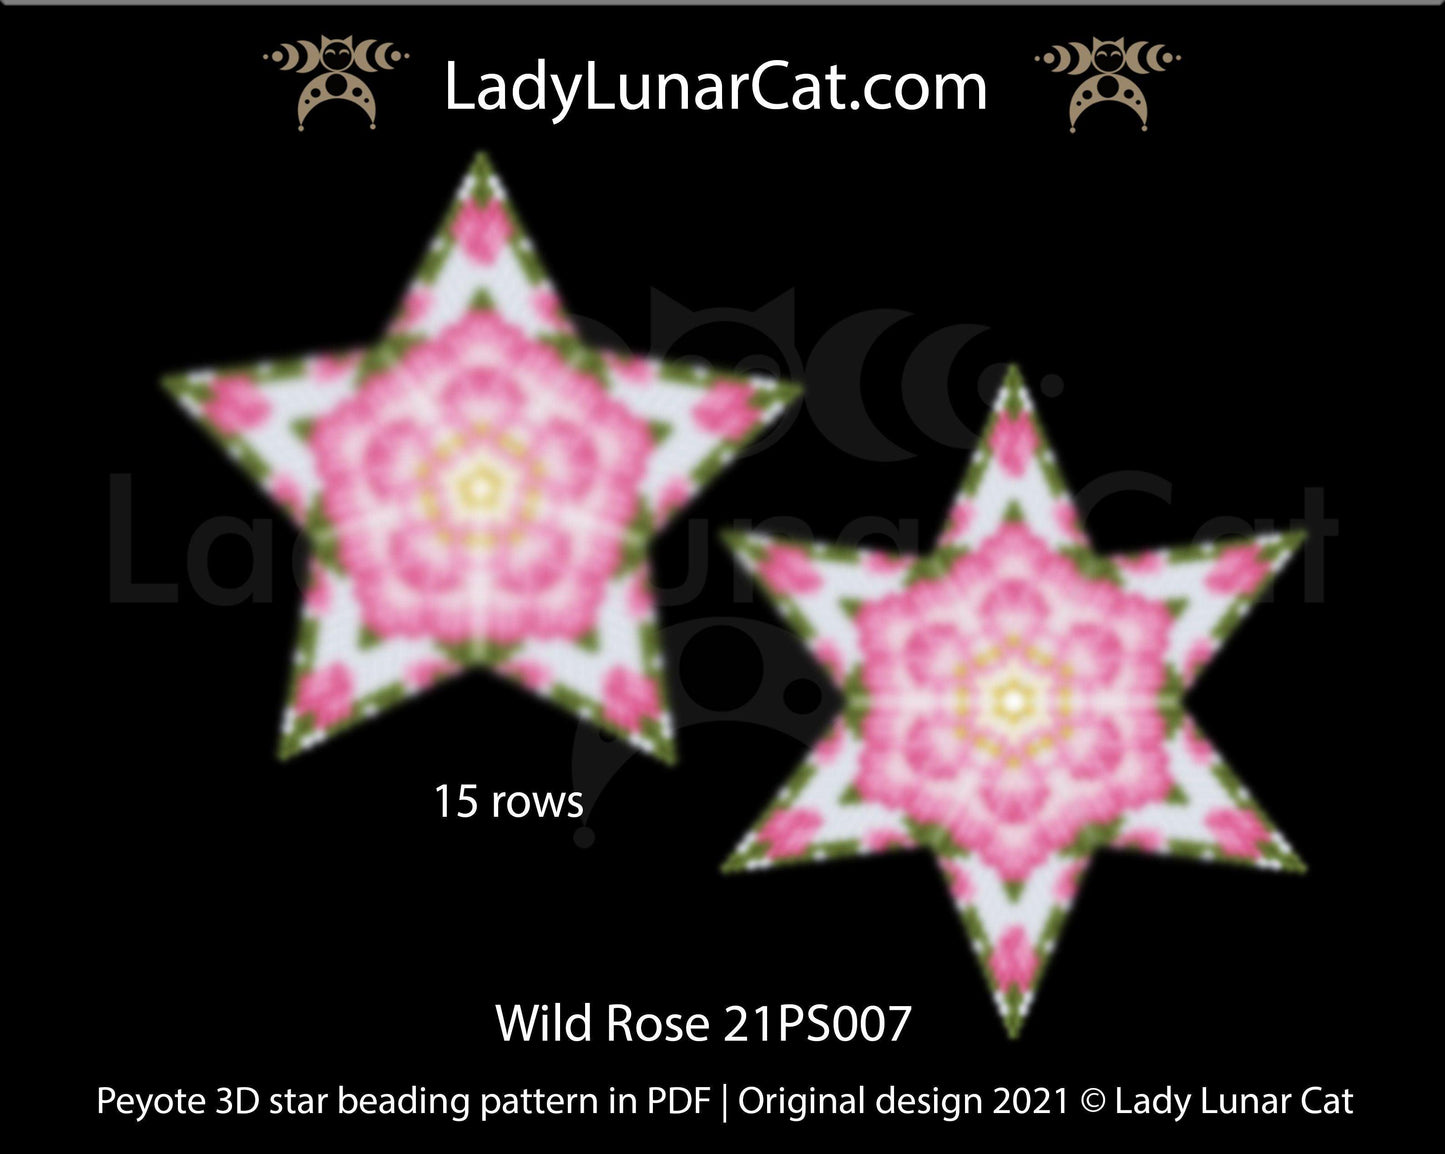 Copy of Beaded star pattern - Summer night 21PS023 | Seed beads tutorial for 3D peyote star LadyLunarCat